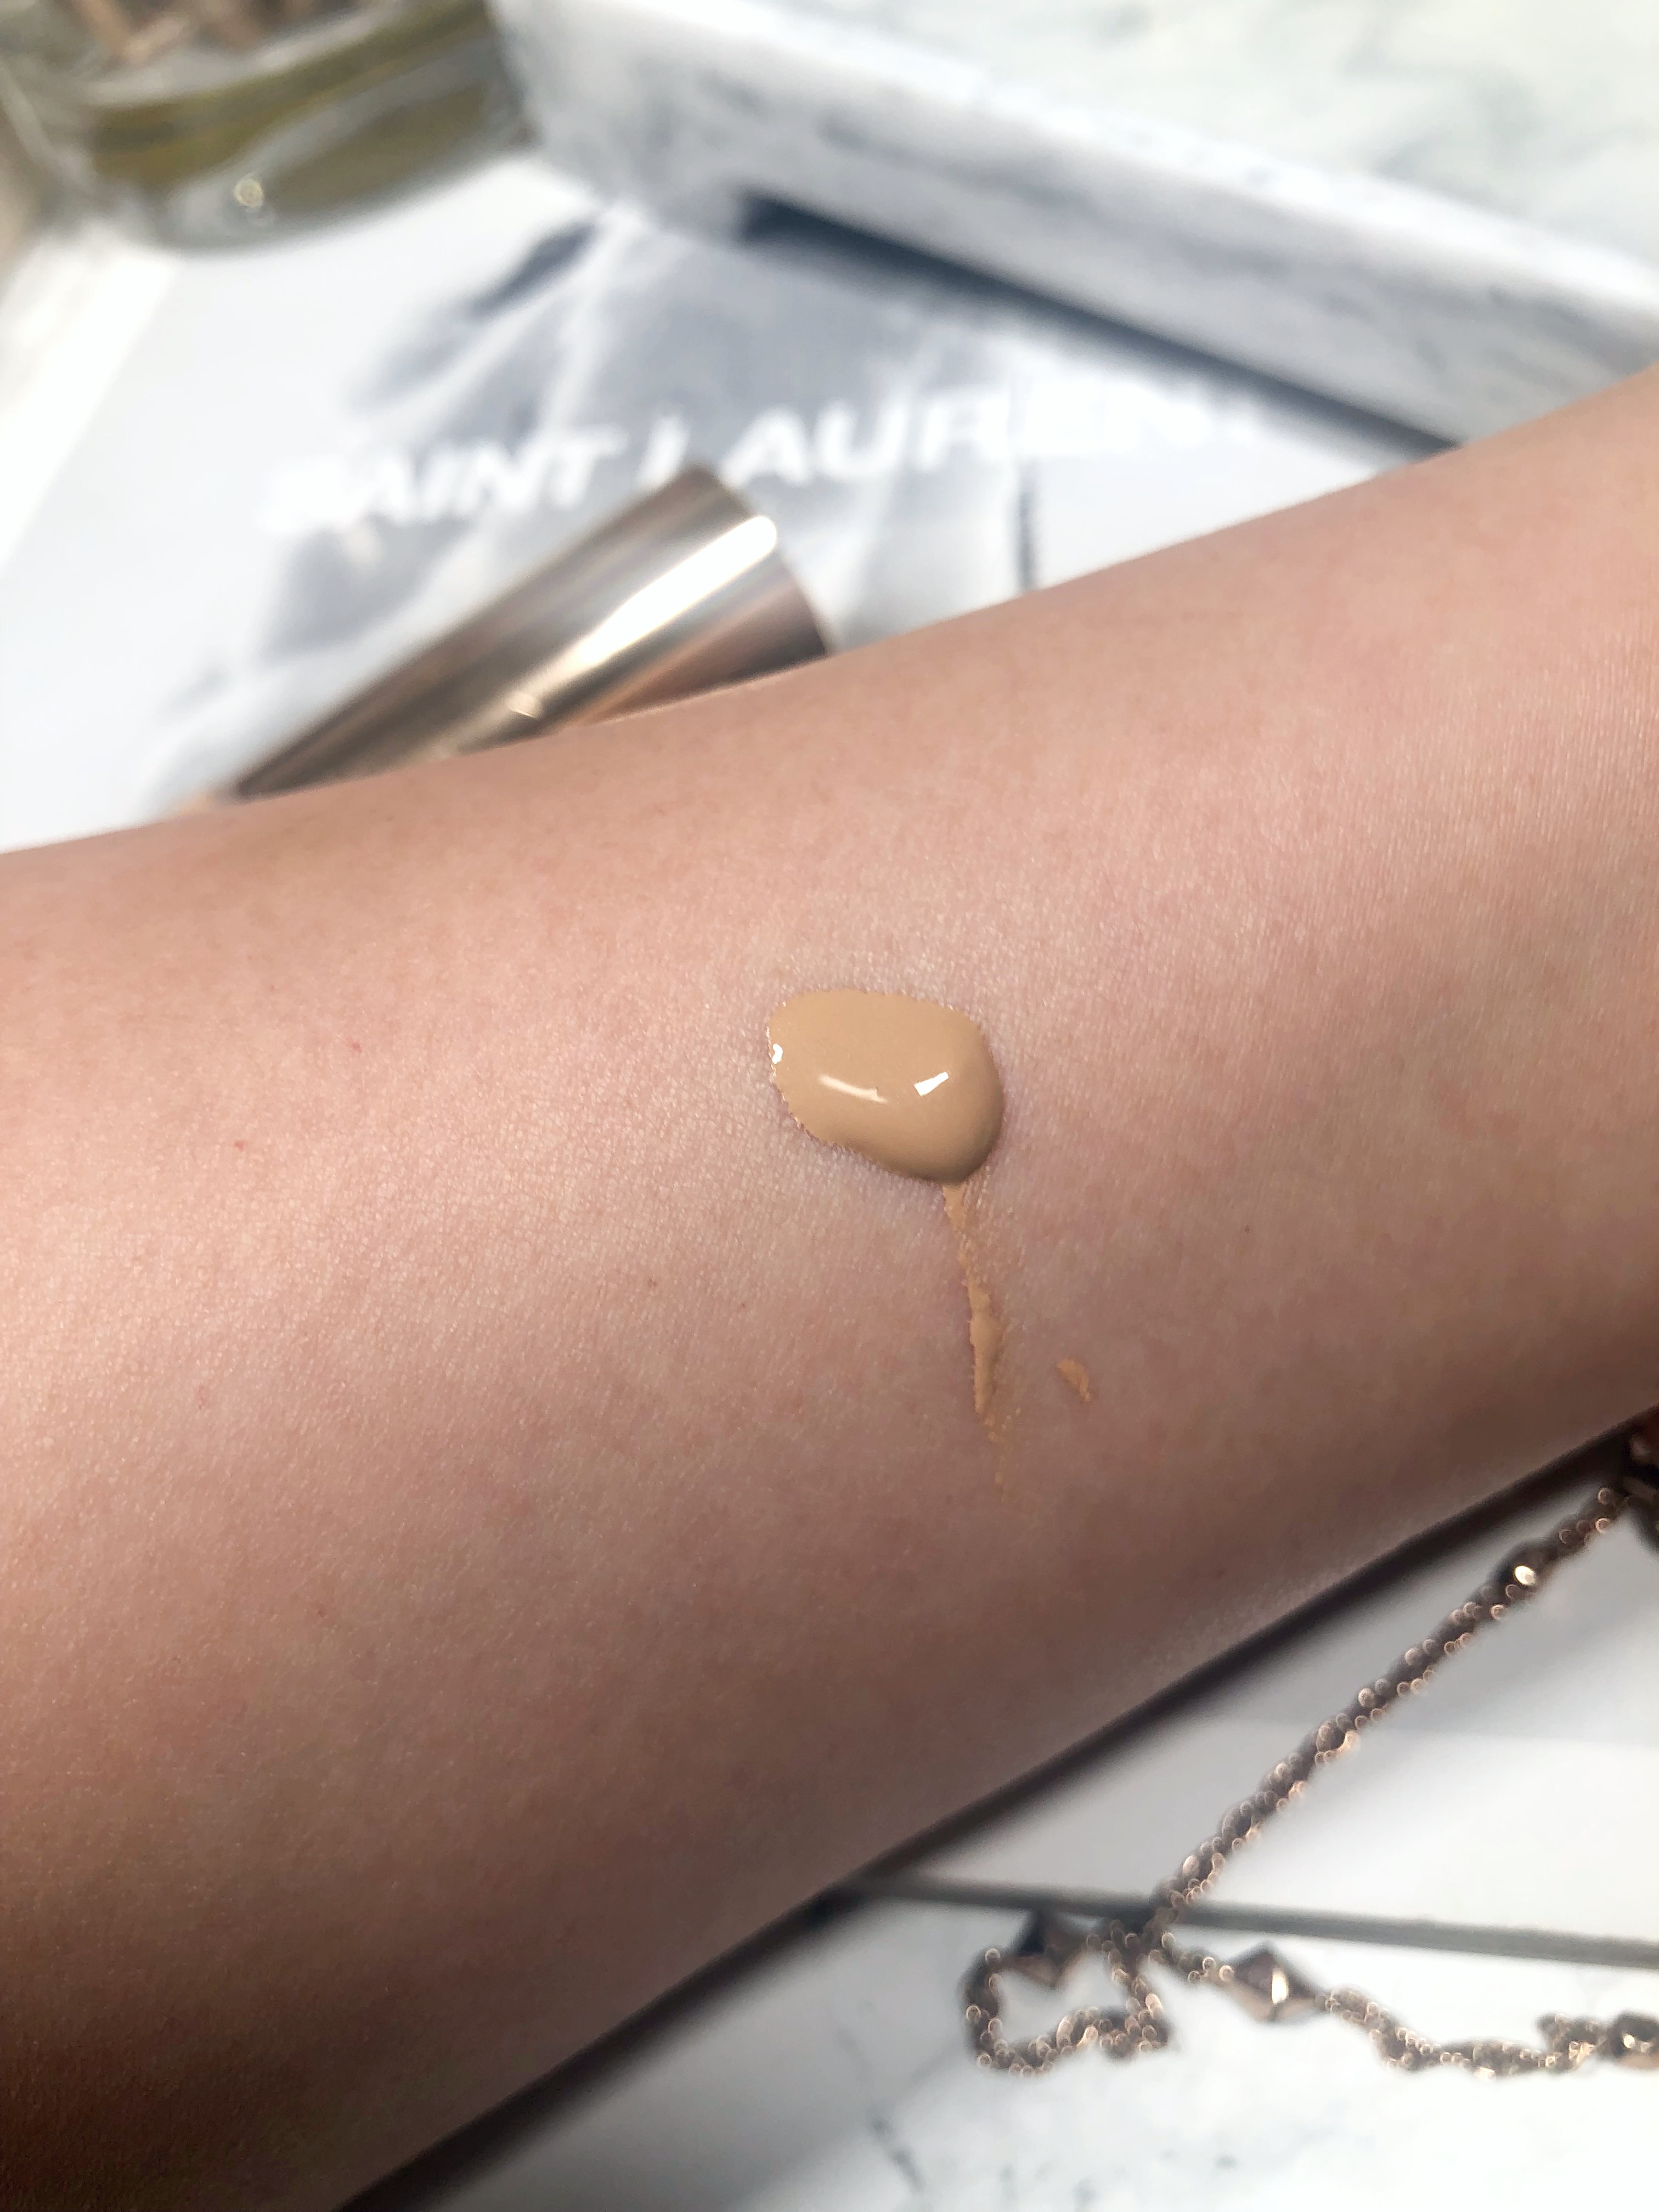 NARS Light Reflecting Advanced Skincare Foundation Review and Swatches